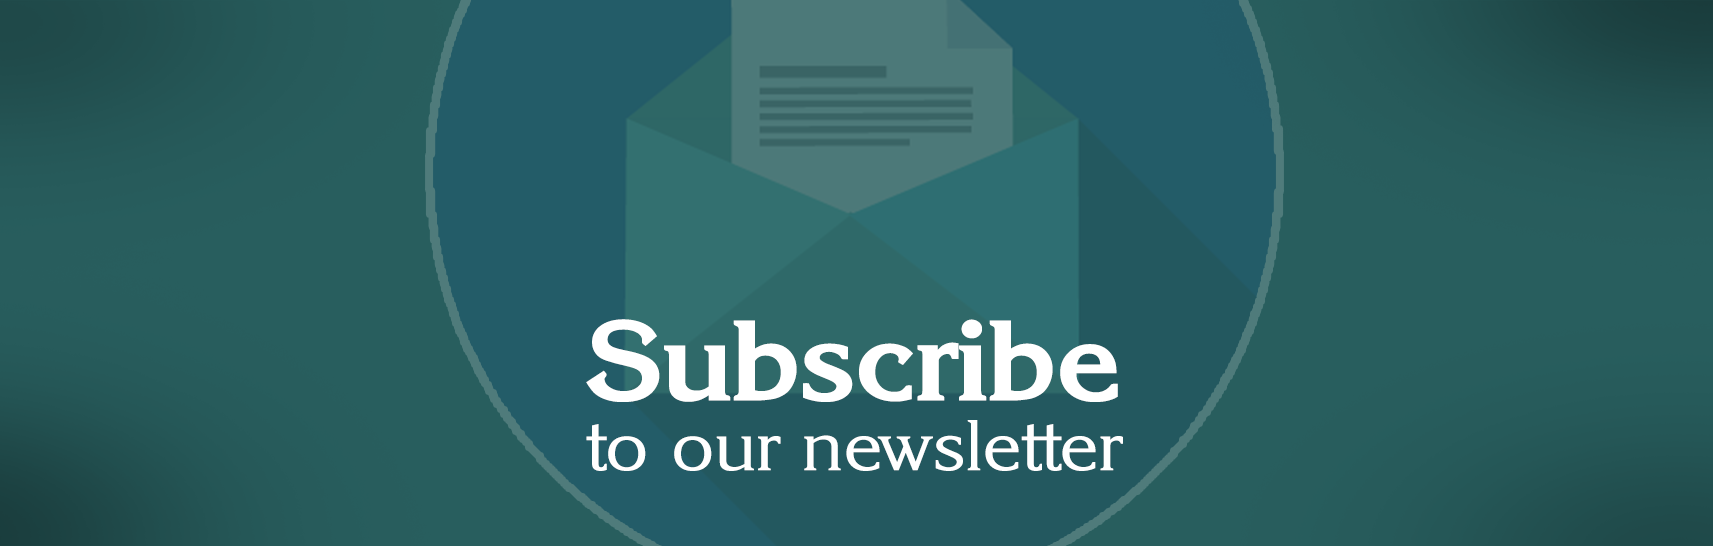 Subscribe Newsletter Button